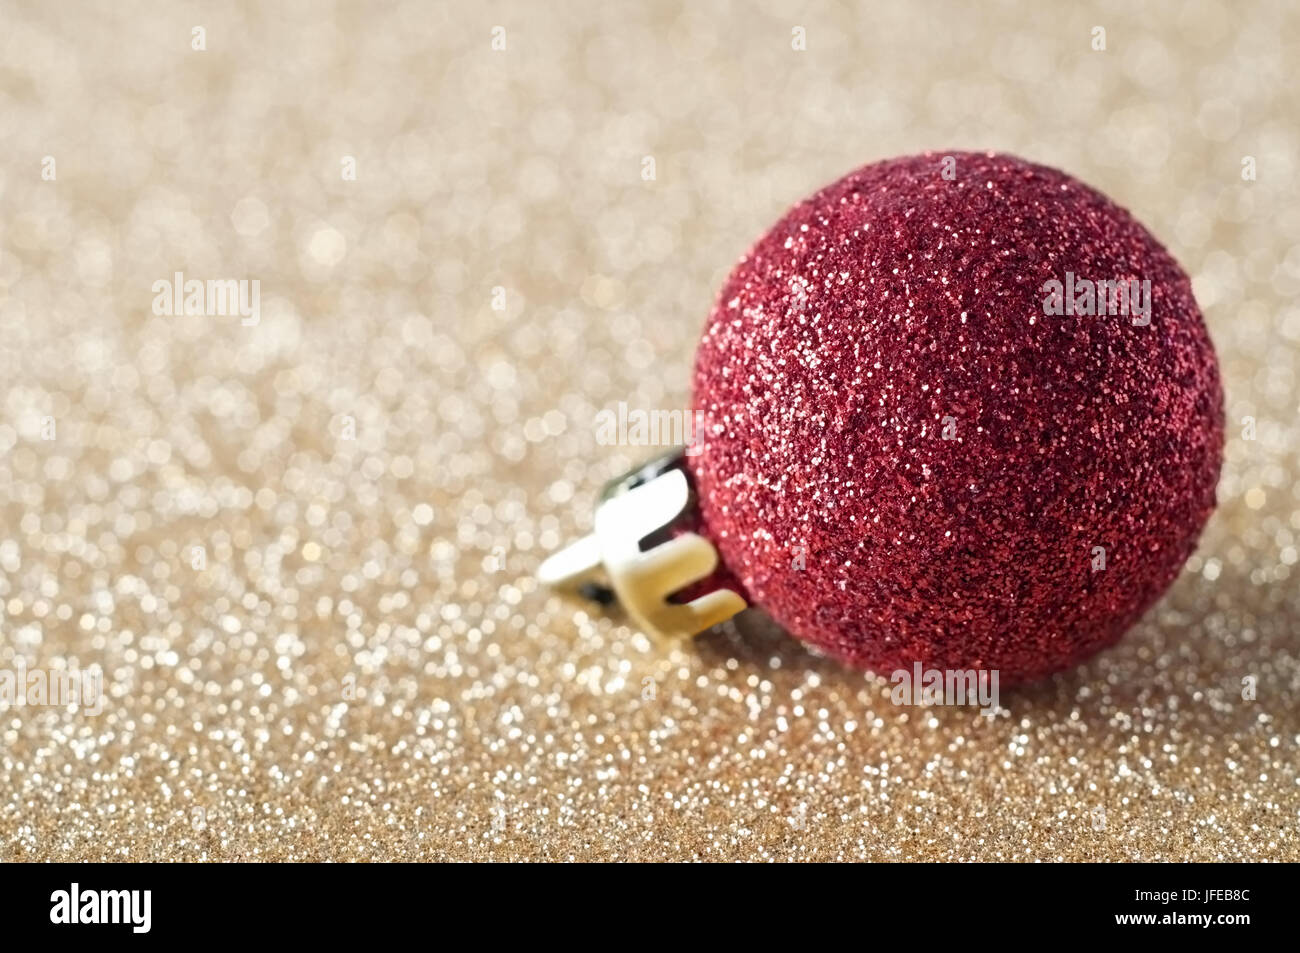 A single, sparkly red bauble, coated in glitter, resting on a gold glitter background that softens into soft focus bokeh in the background.  Copy spac Stock Photo